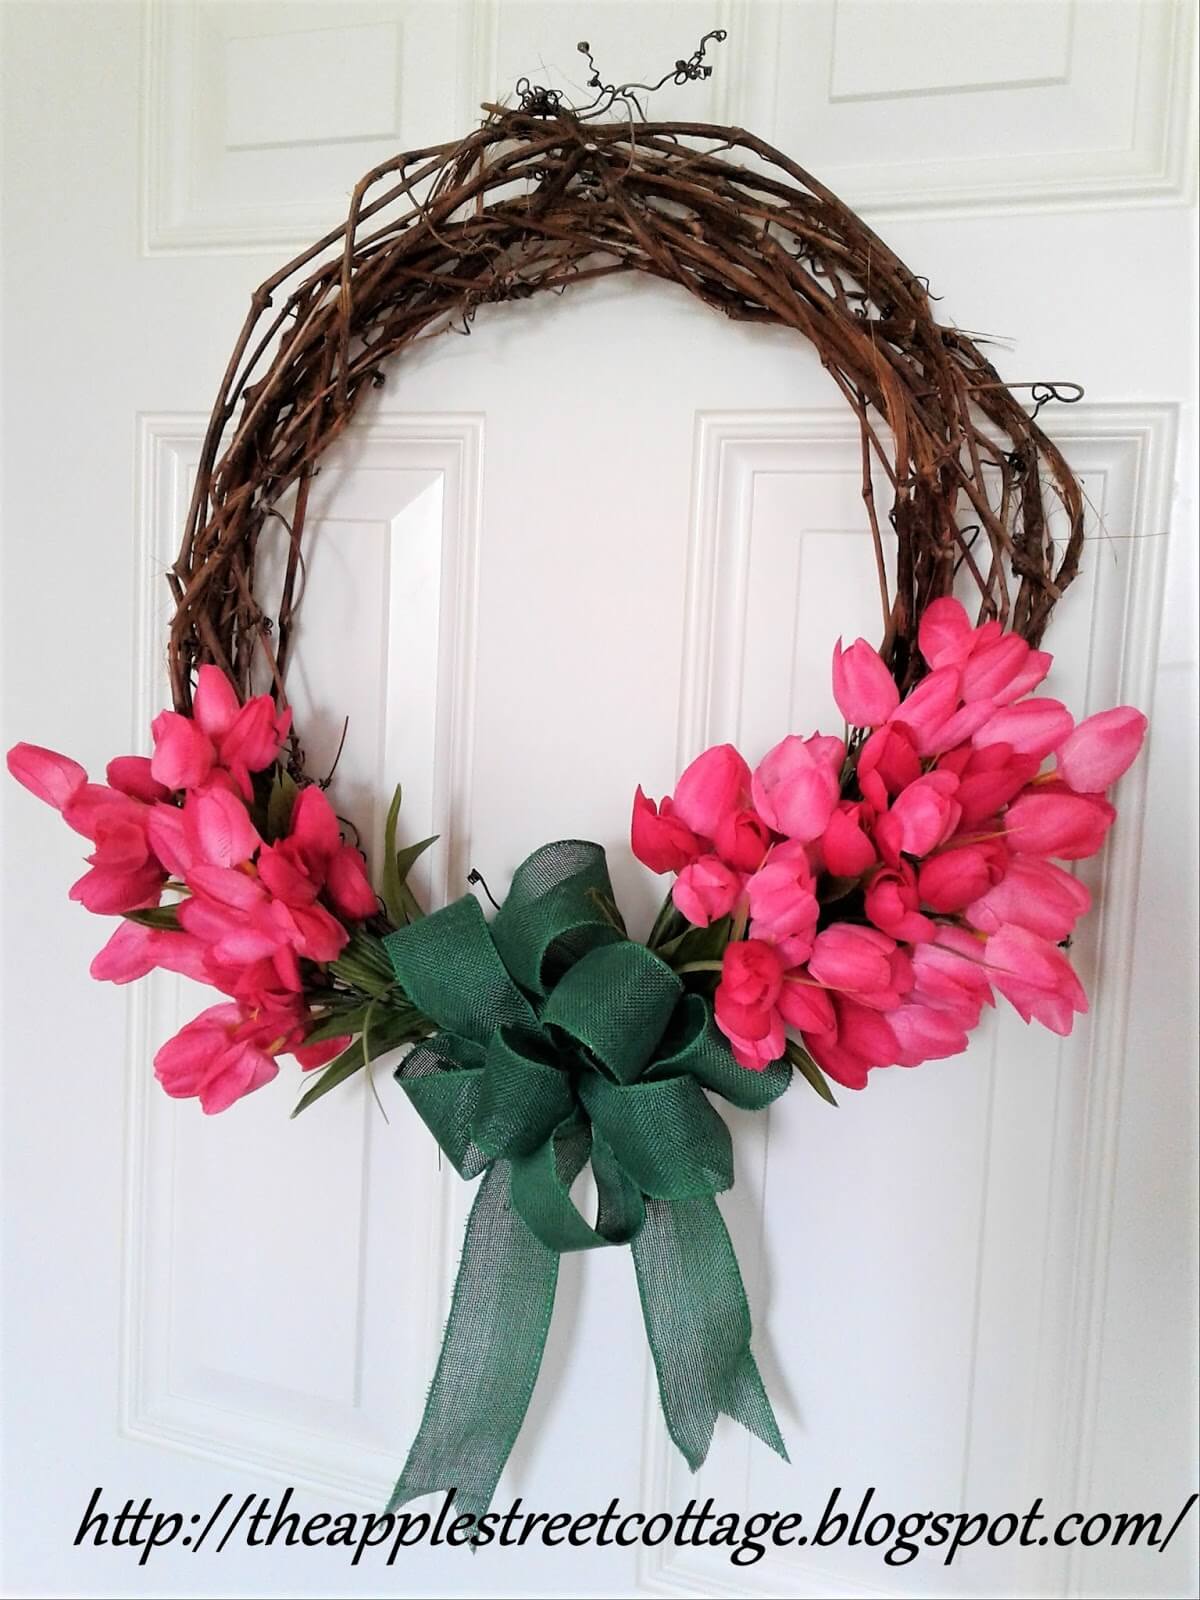 Spring Tulips on Homemade Grapevine Wreath